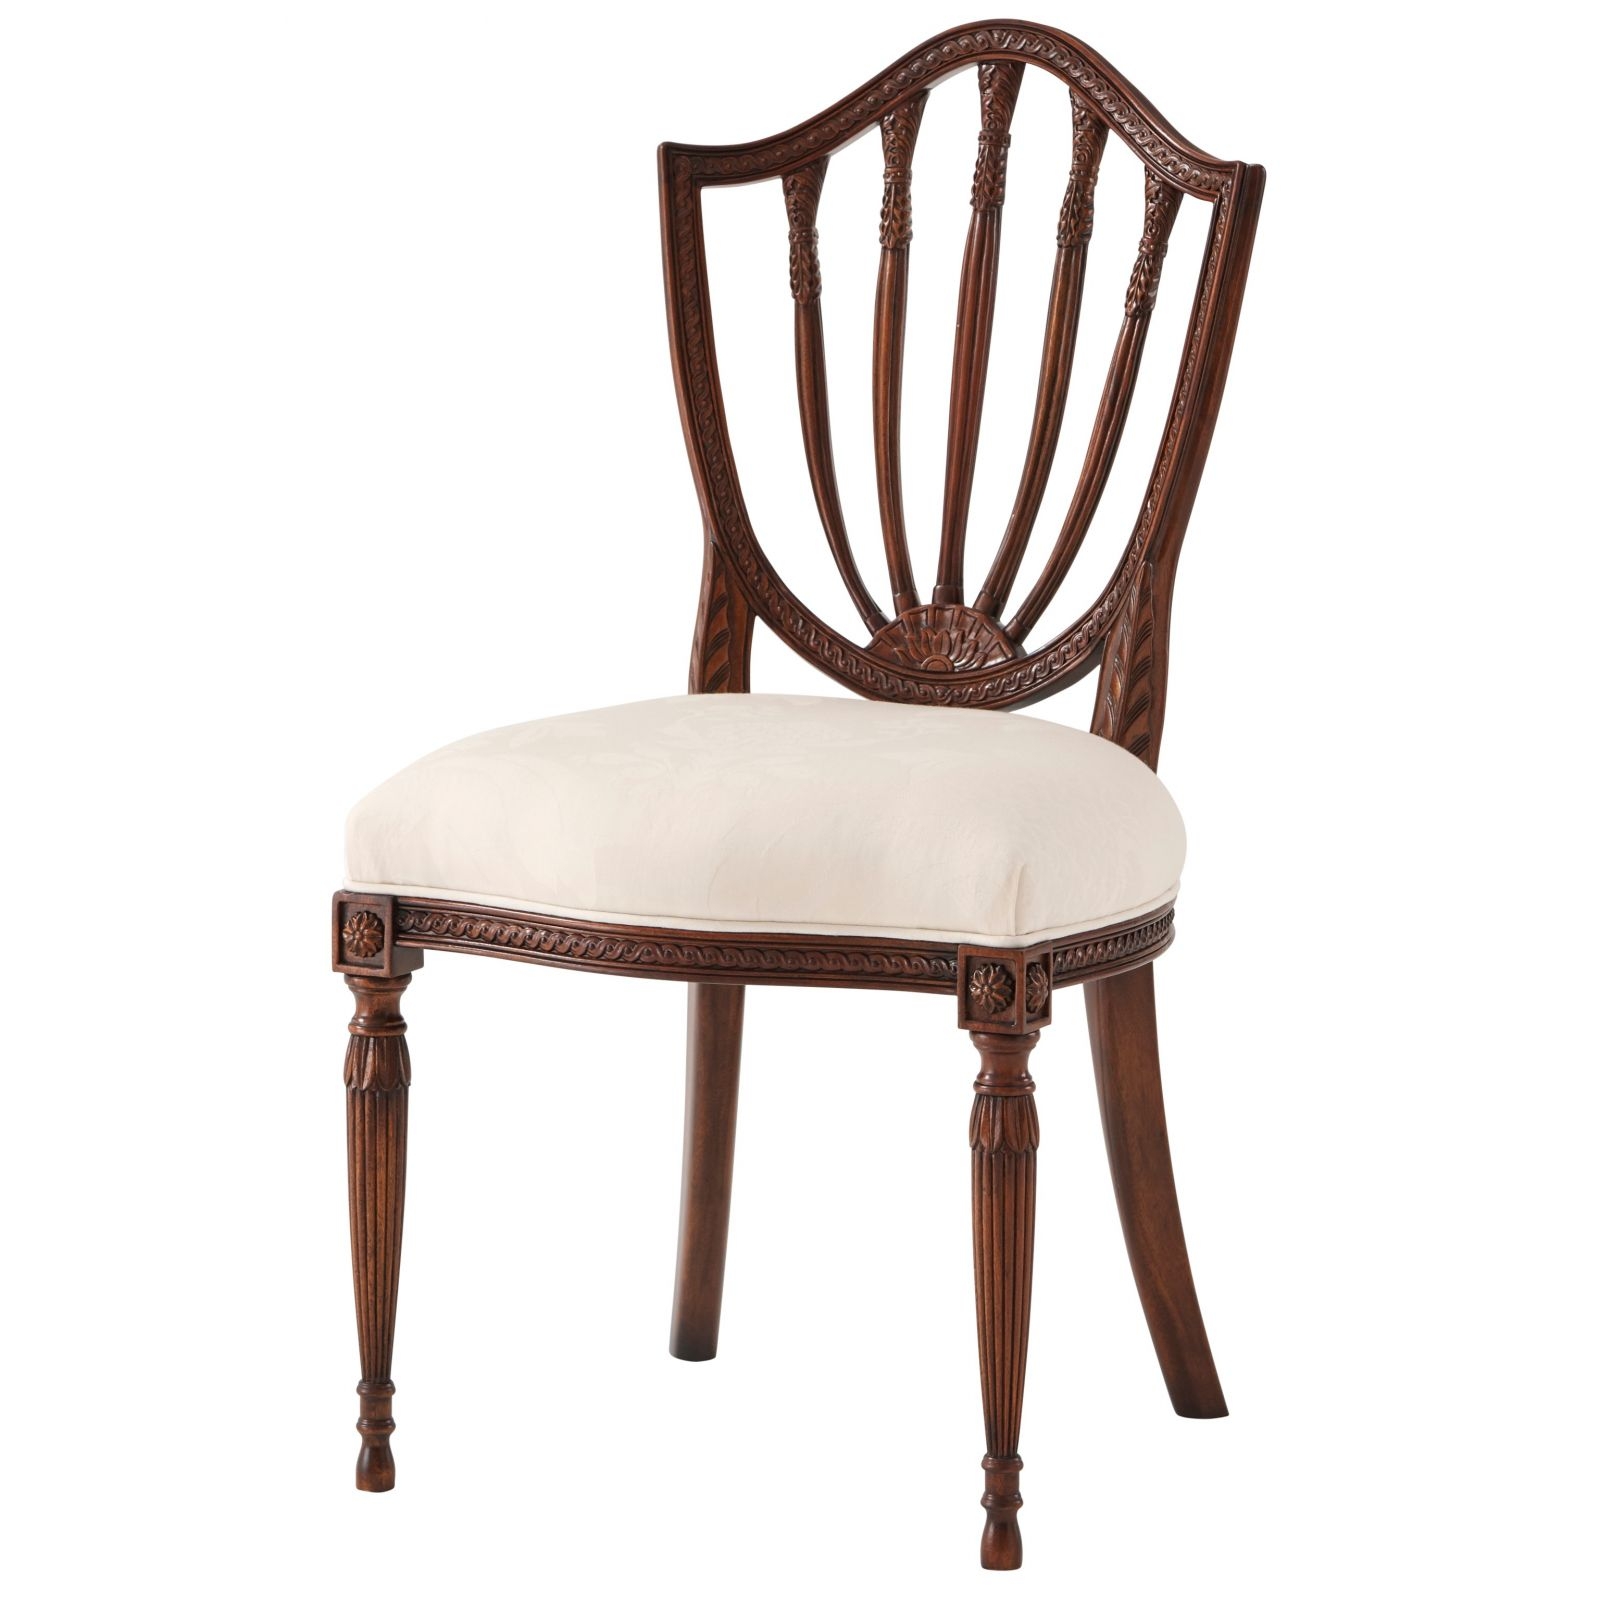 Theodore Alexander Hepplewhite style dining chair with Isle Mill Scottish wool seat fabric